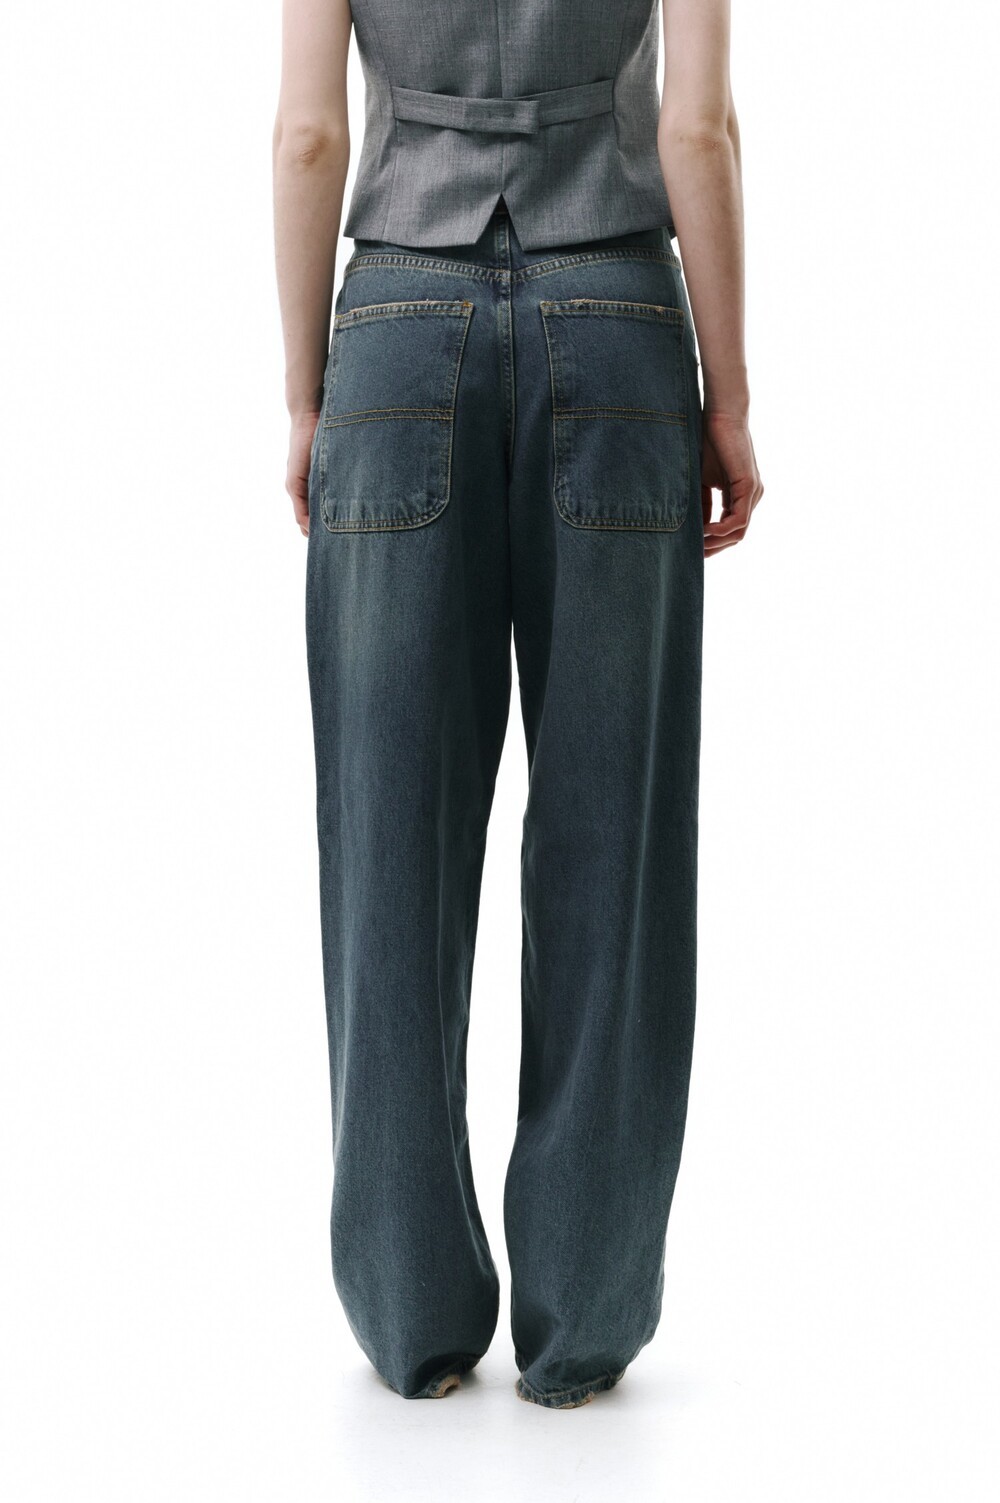 Relaxed jeans with a distressed effect